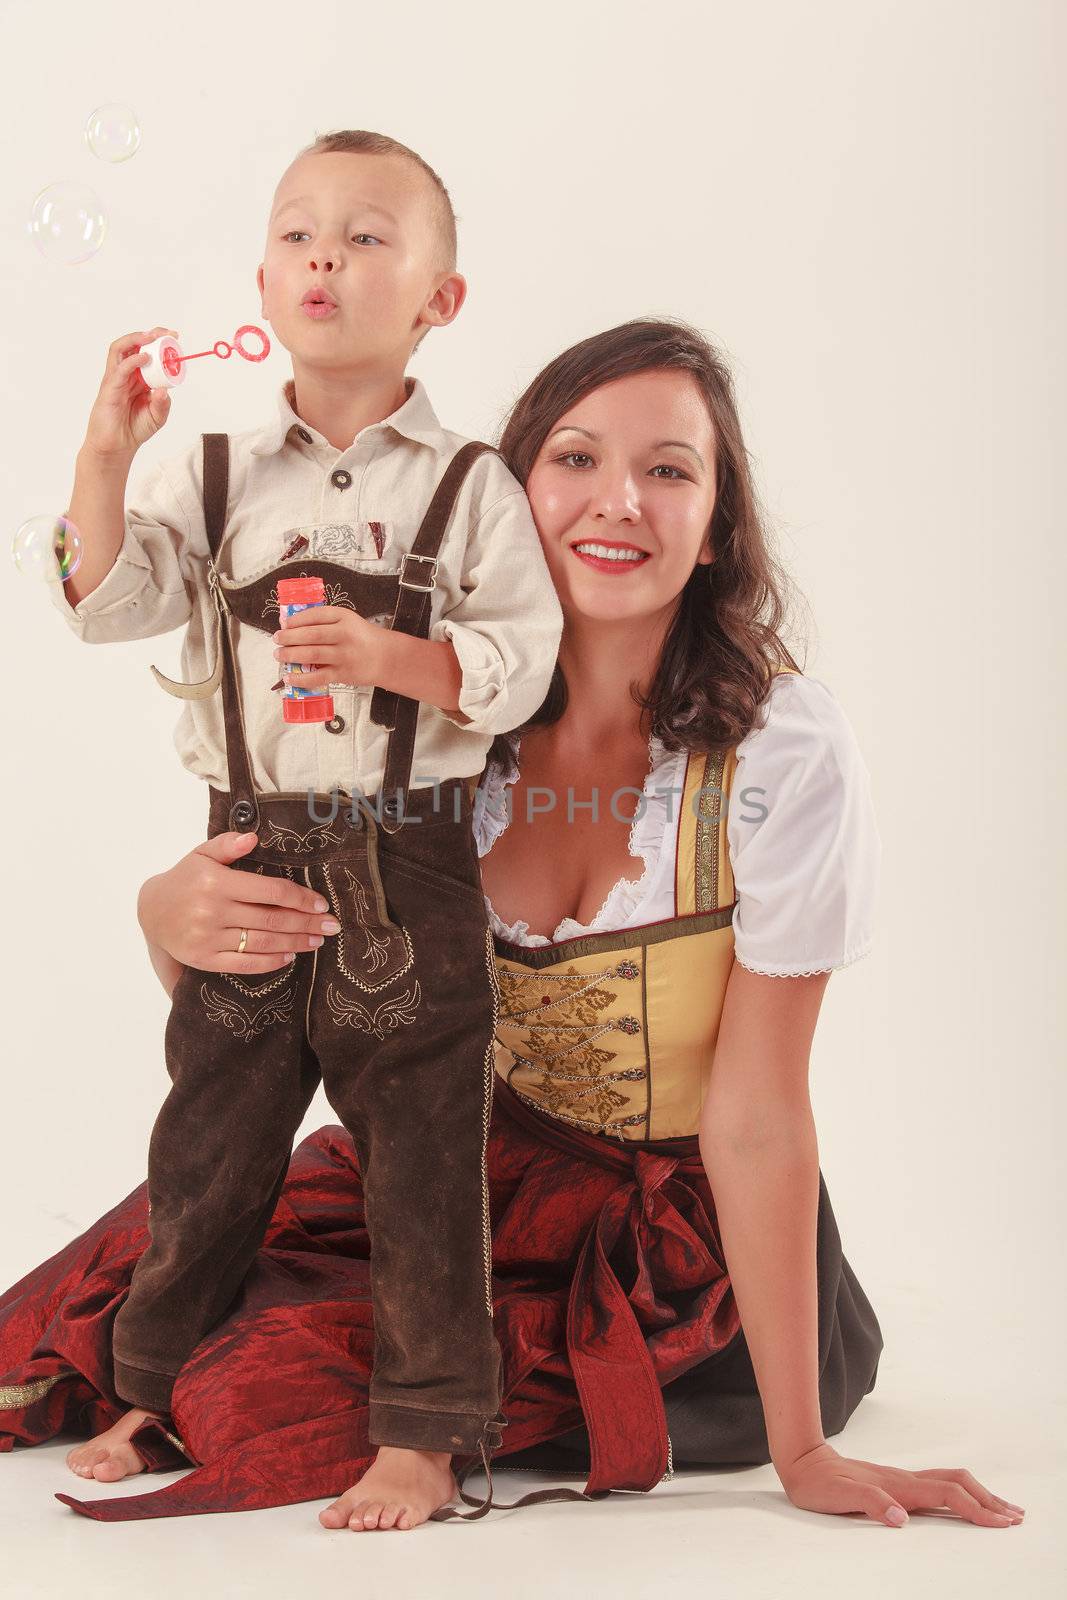 Single mother with her son in Bavarian costume